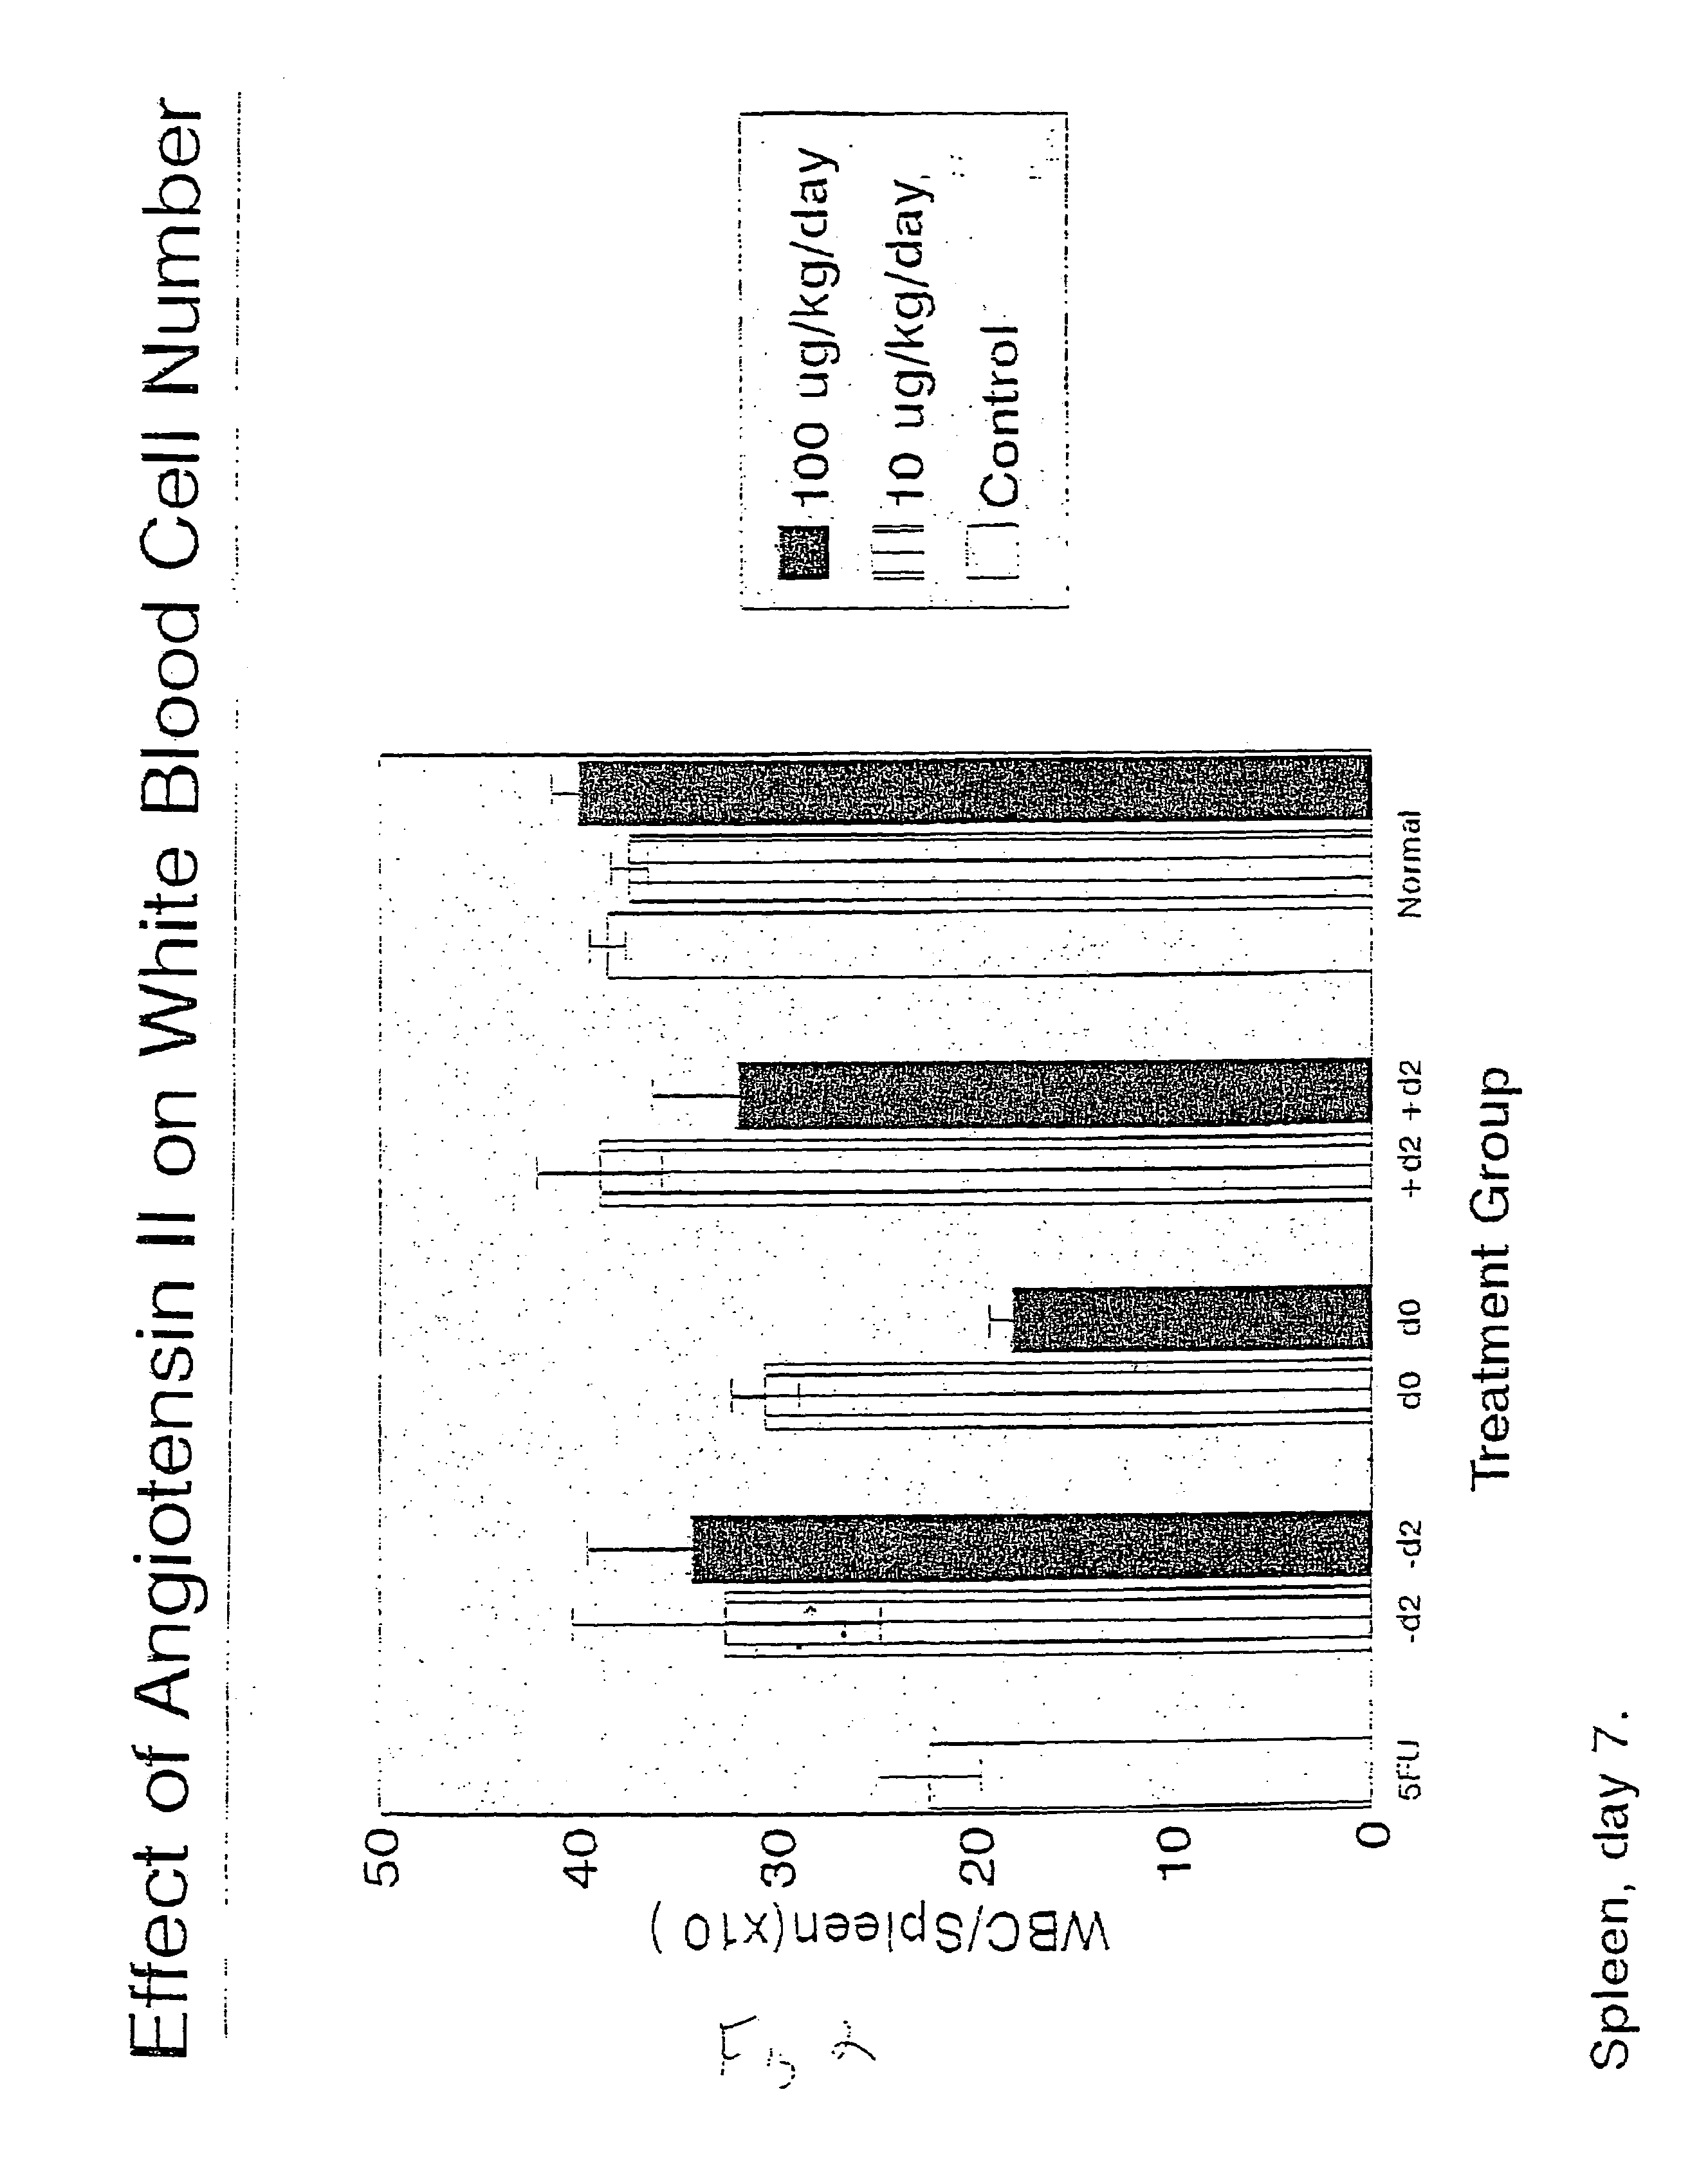 Method for promoting hematopoietic and mesenchymal cell proliferation and differentiation